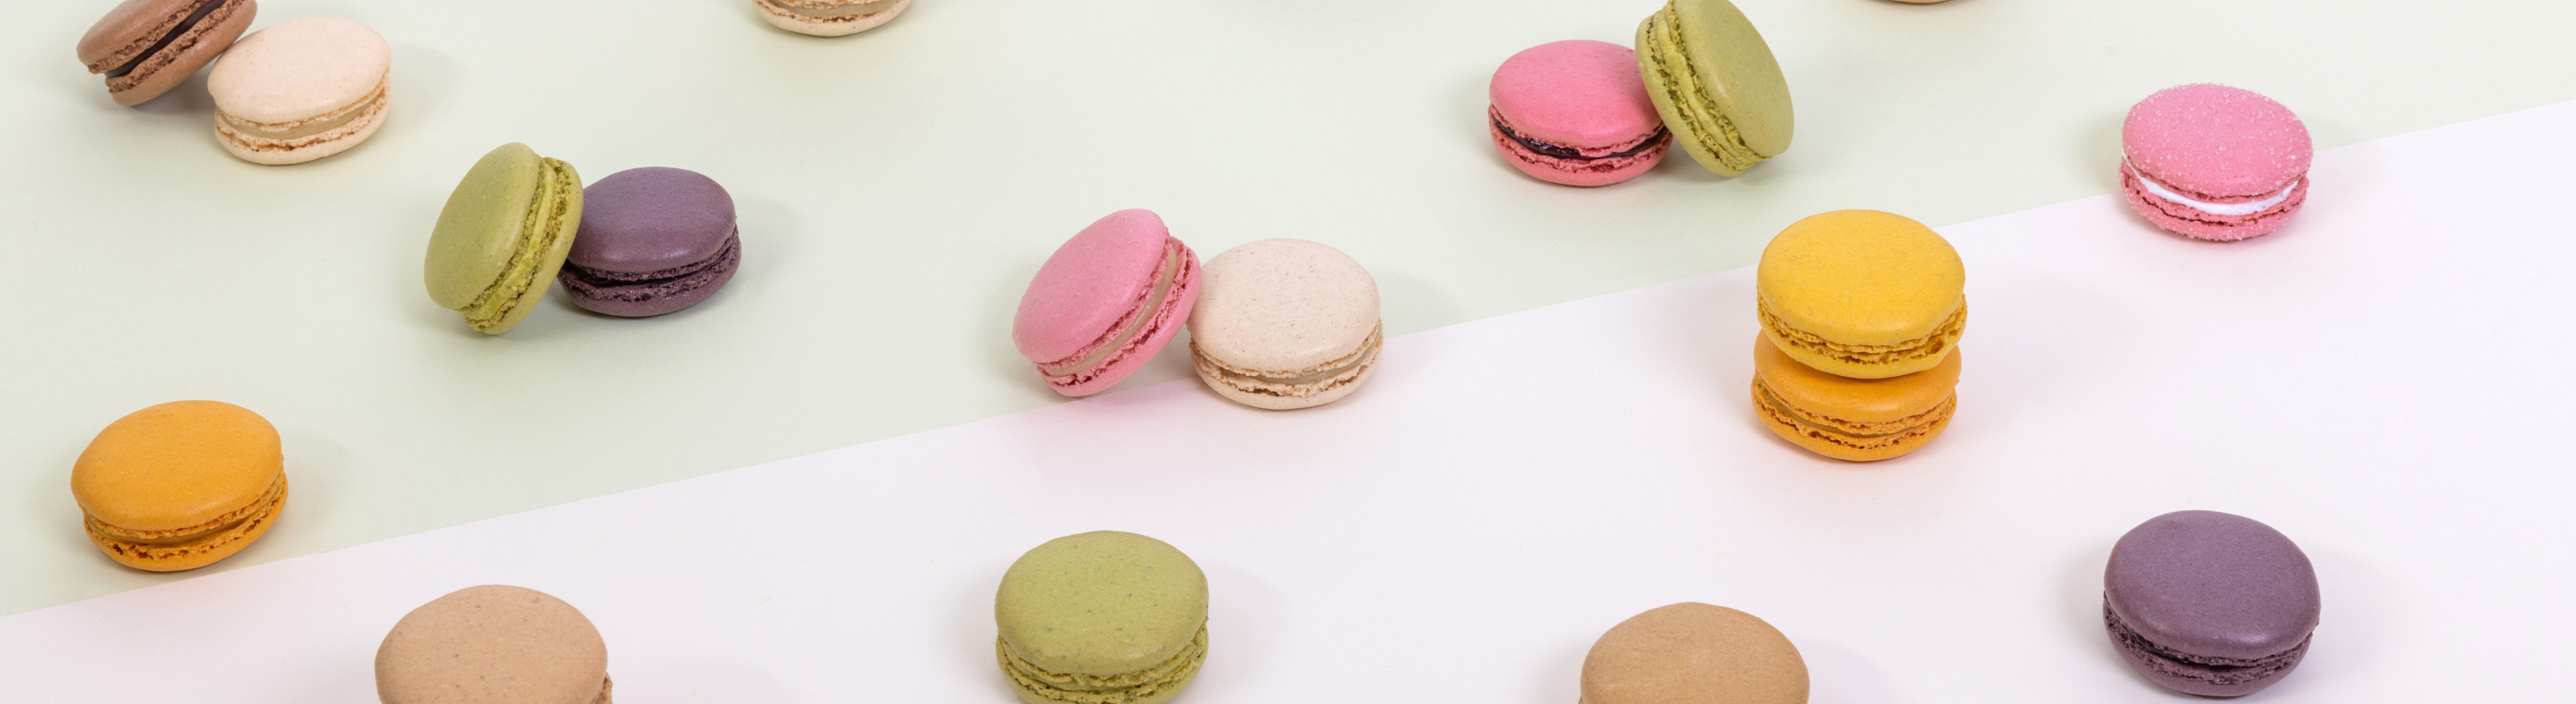 Our macaron flavors